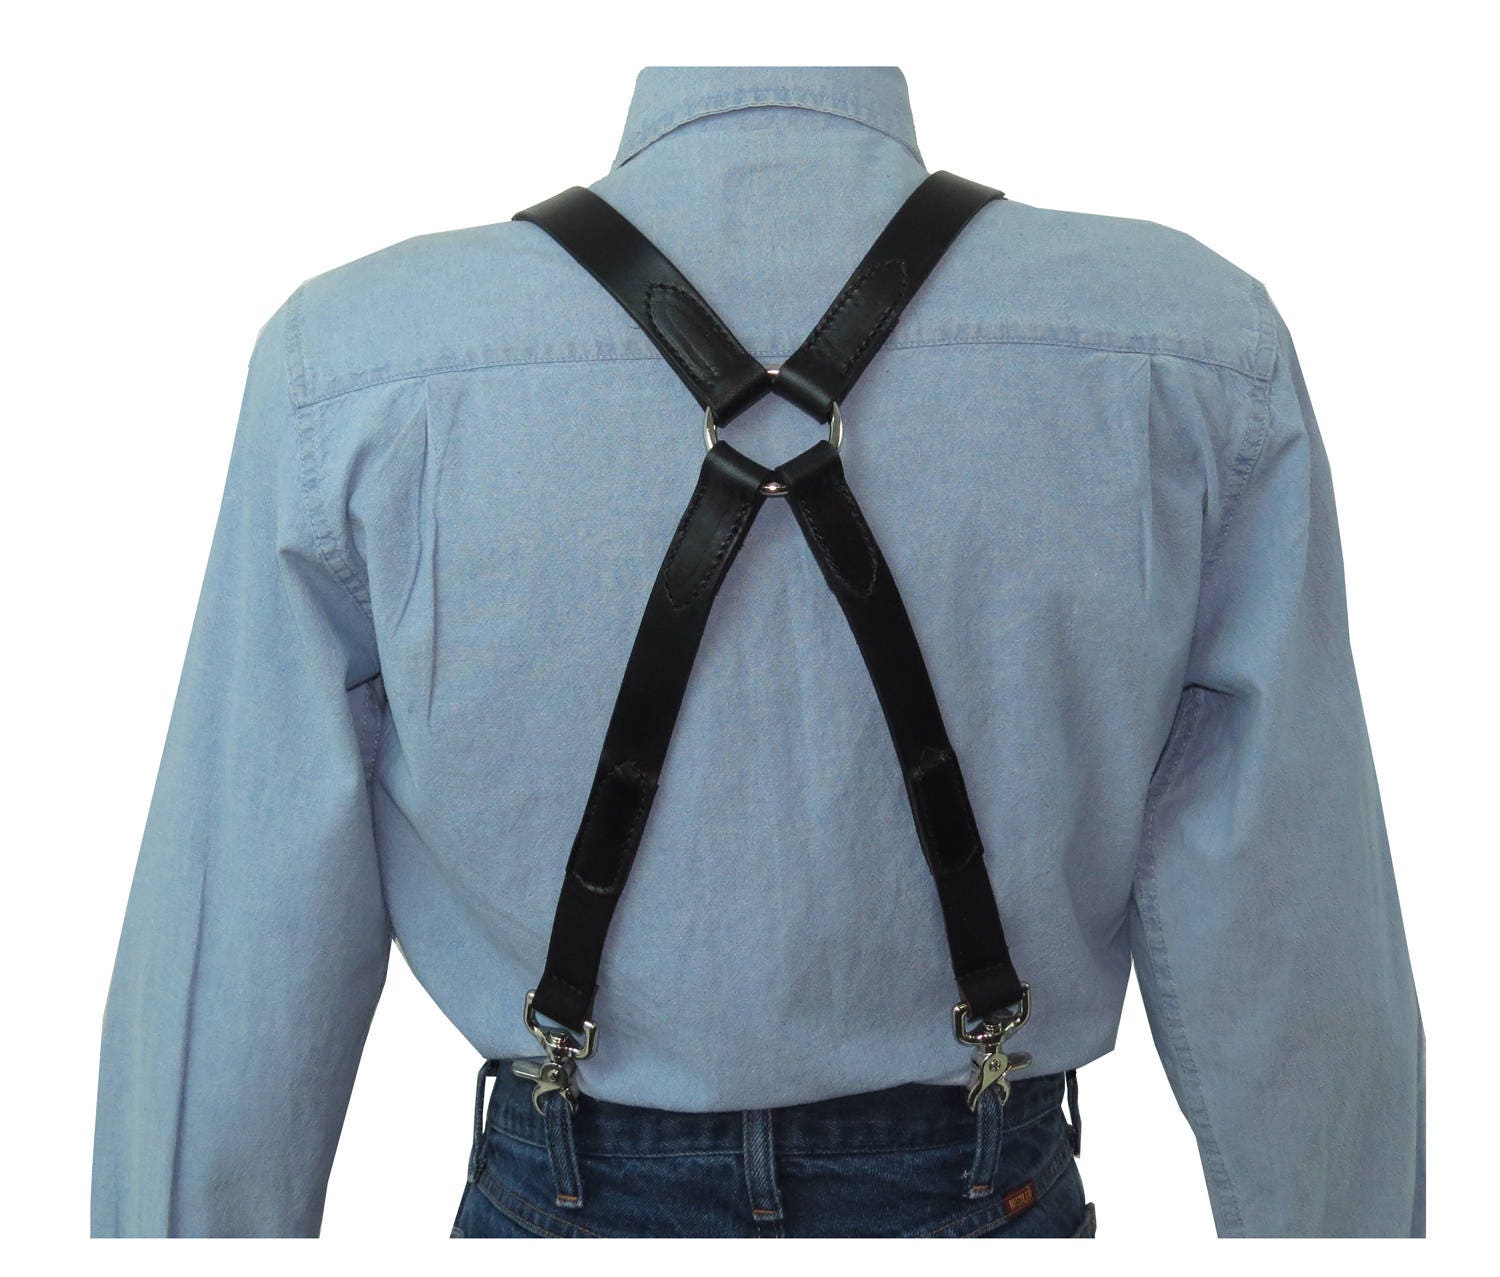 Black Premium Leather X-back Suspenders With Silver Ring Back 